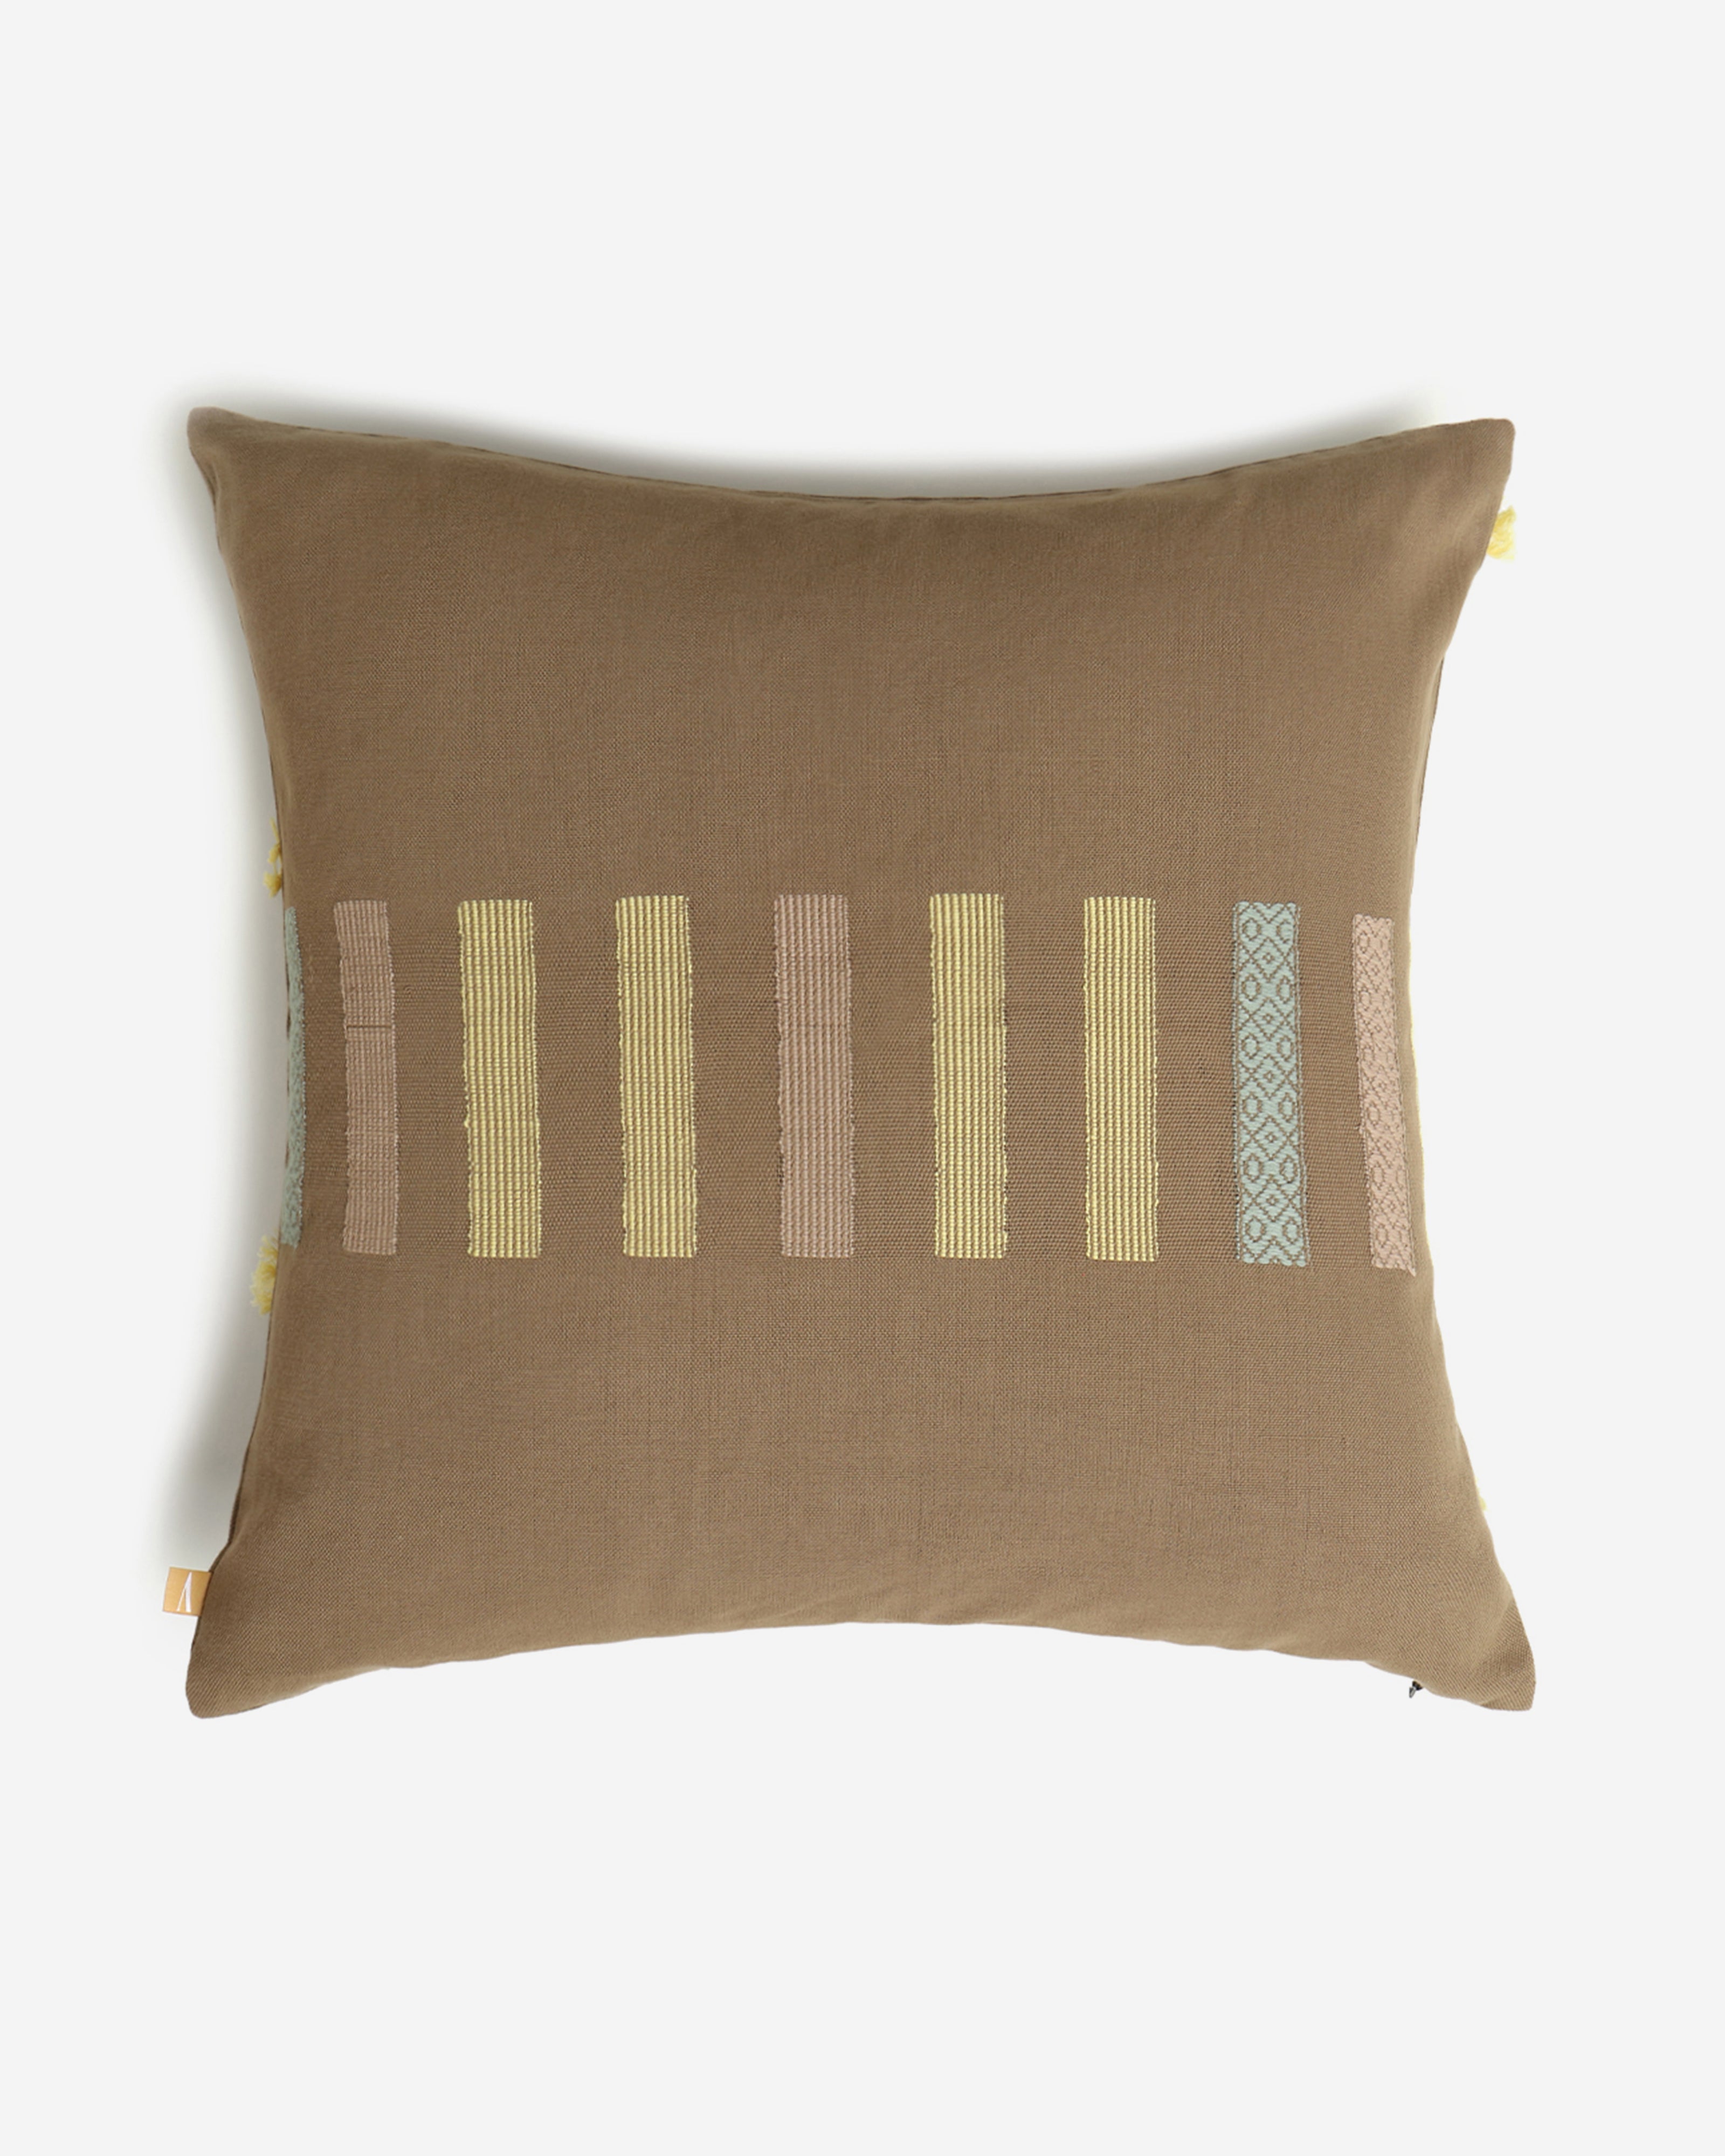 Unabridged Extra Weft Cotton Cushion Cover - Light Brown